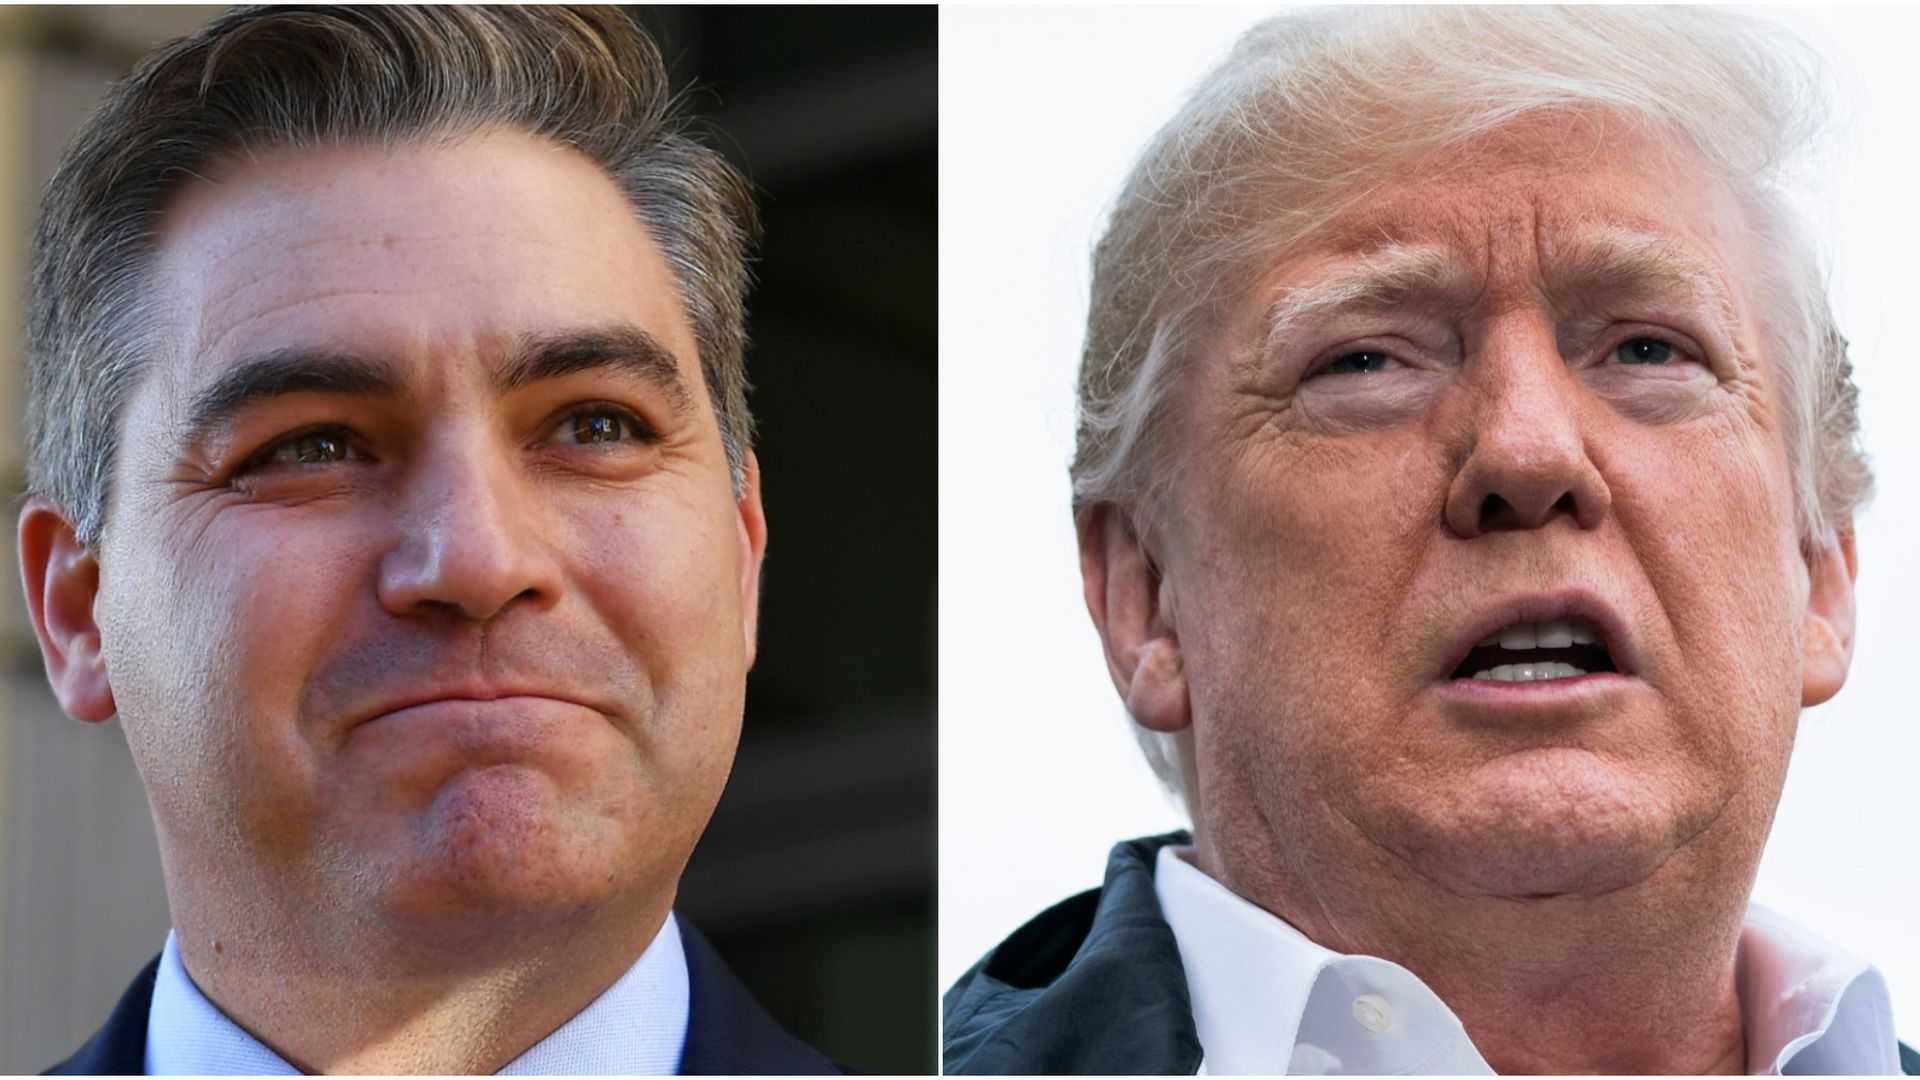 A split image with Jim Acosta on the right looking happy and Donald Trump on the right looking unhappy